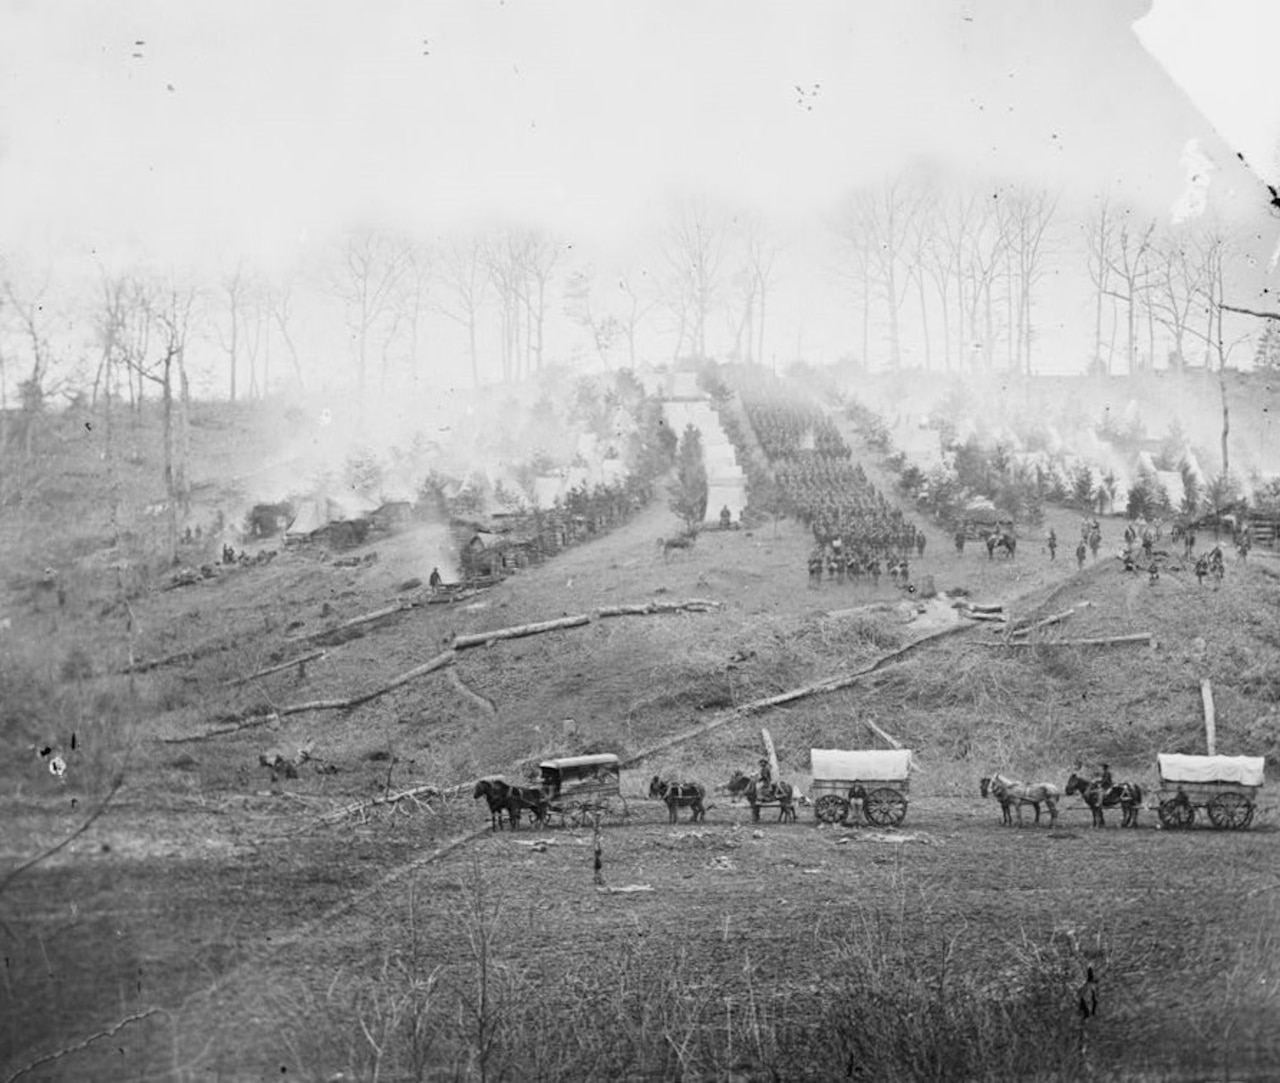 A campsite sits on a hill with covered wagons and horses in the foreground in a black and white photo.